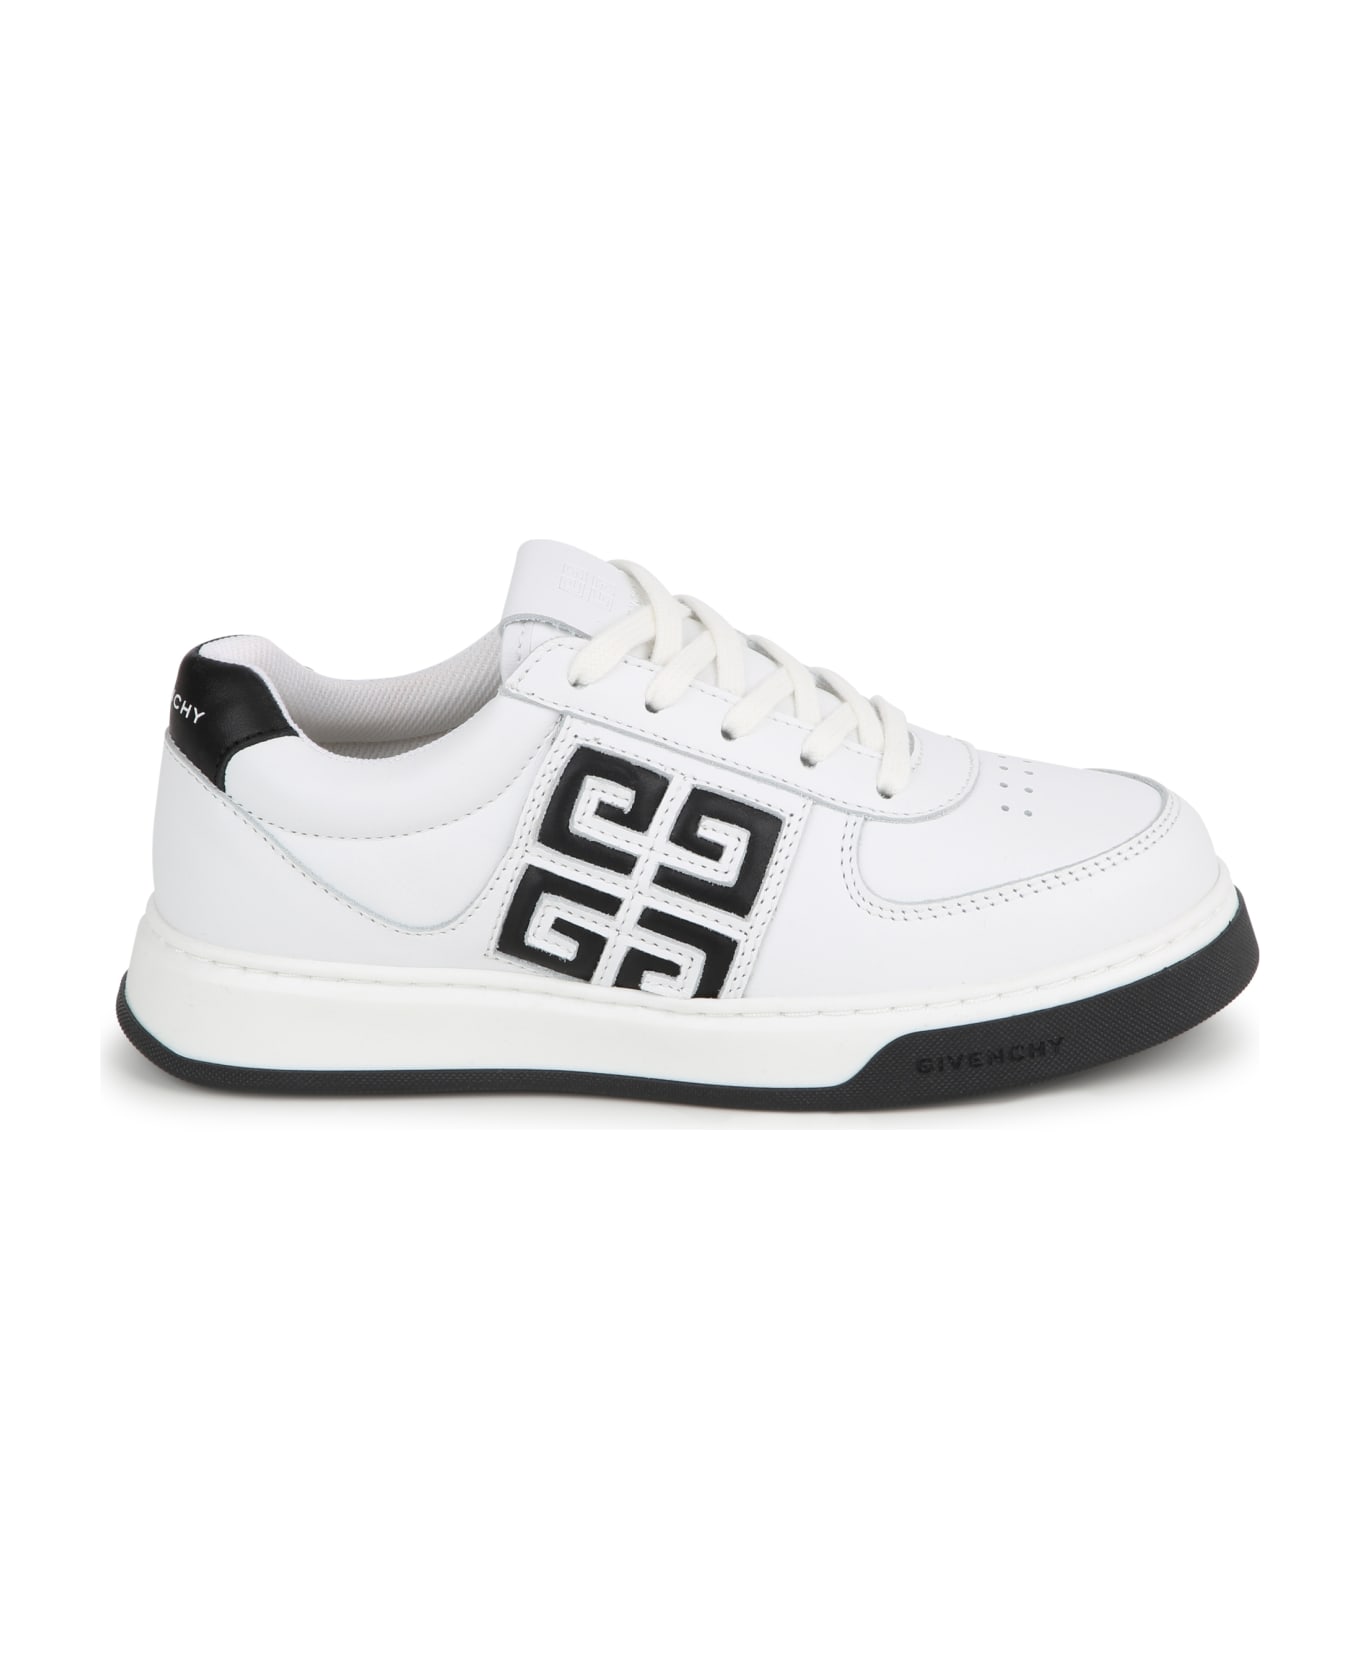 Givenchy 4g Leather Sneakers - White シューズ